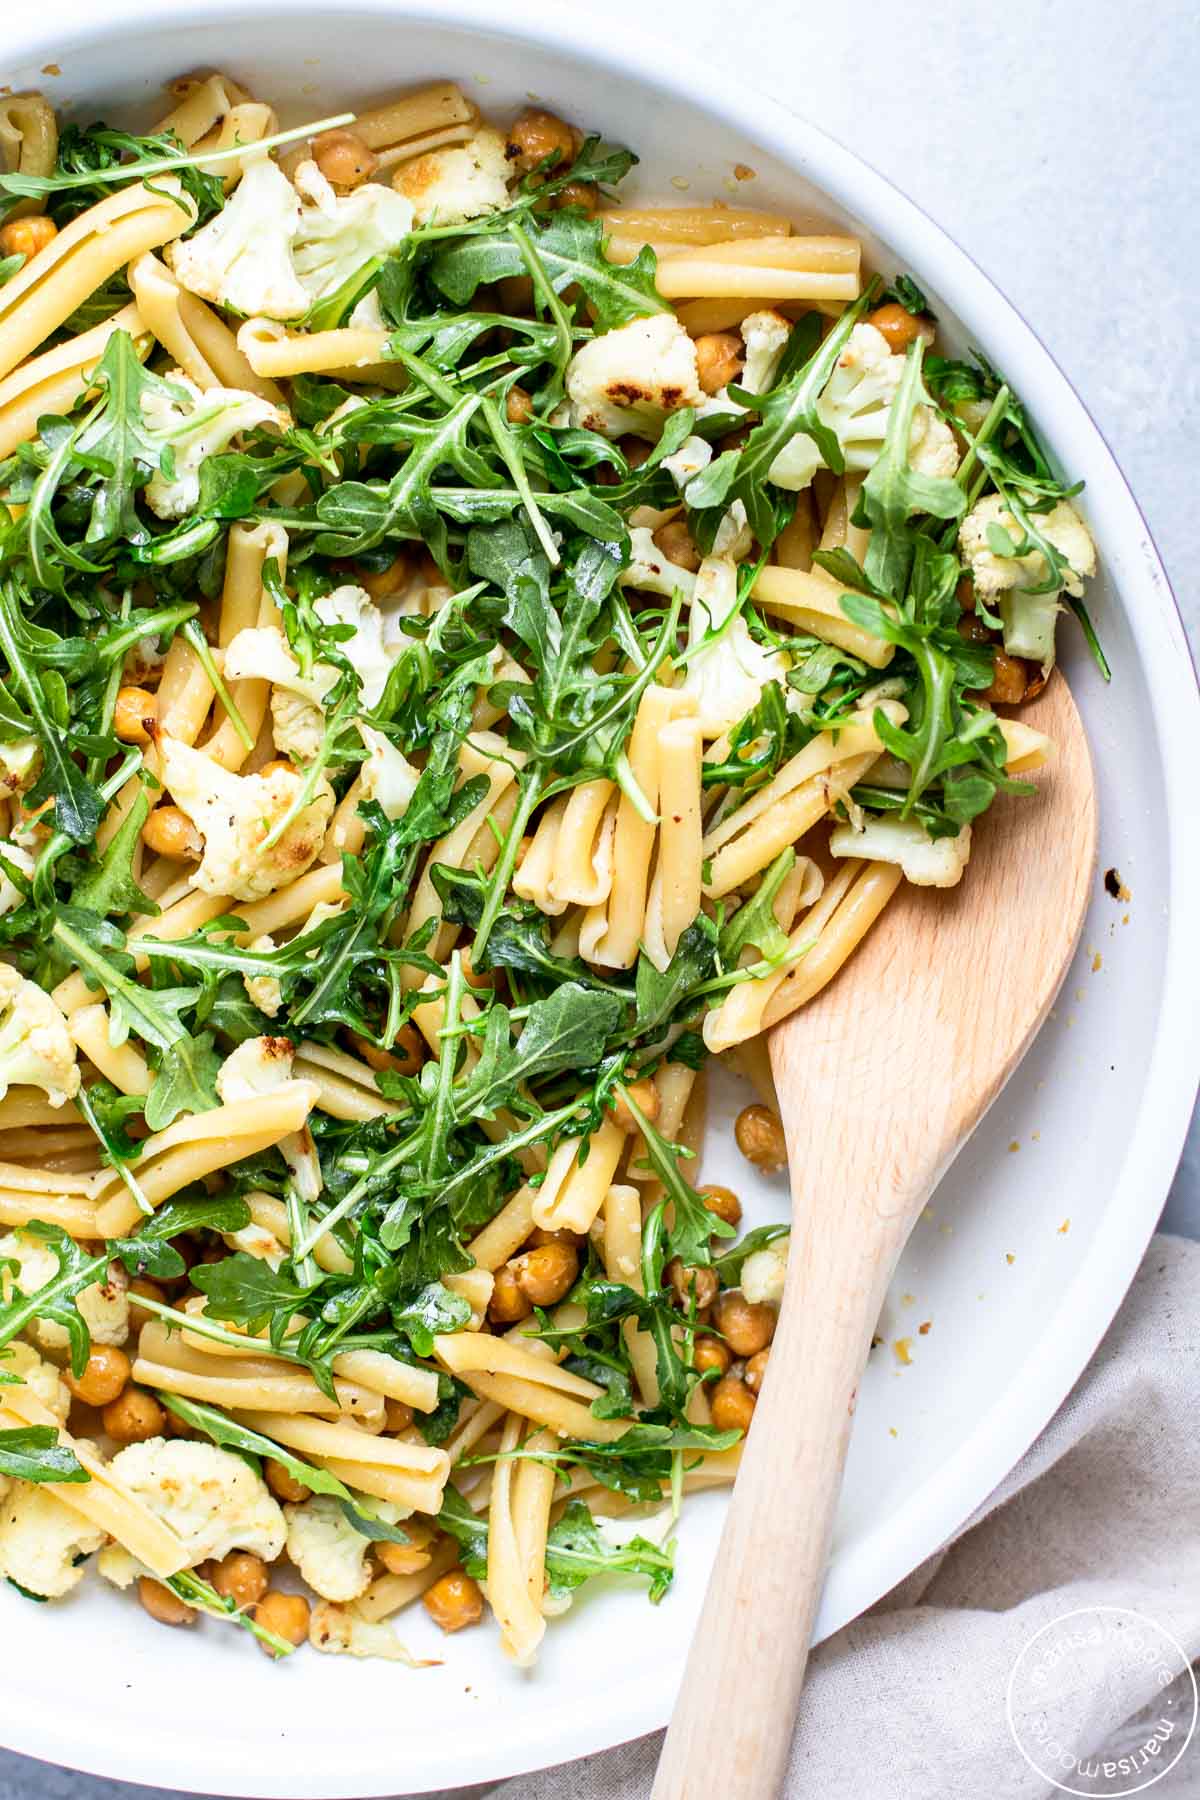 White skillet filled with the pasta and vegetable recipe with a wooden spoon